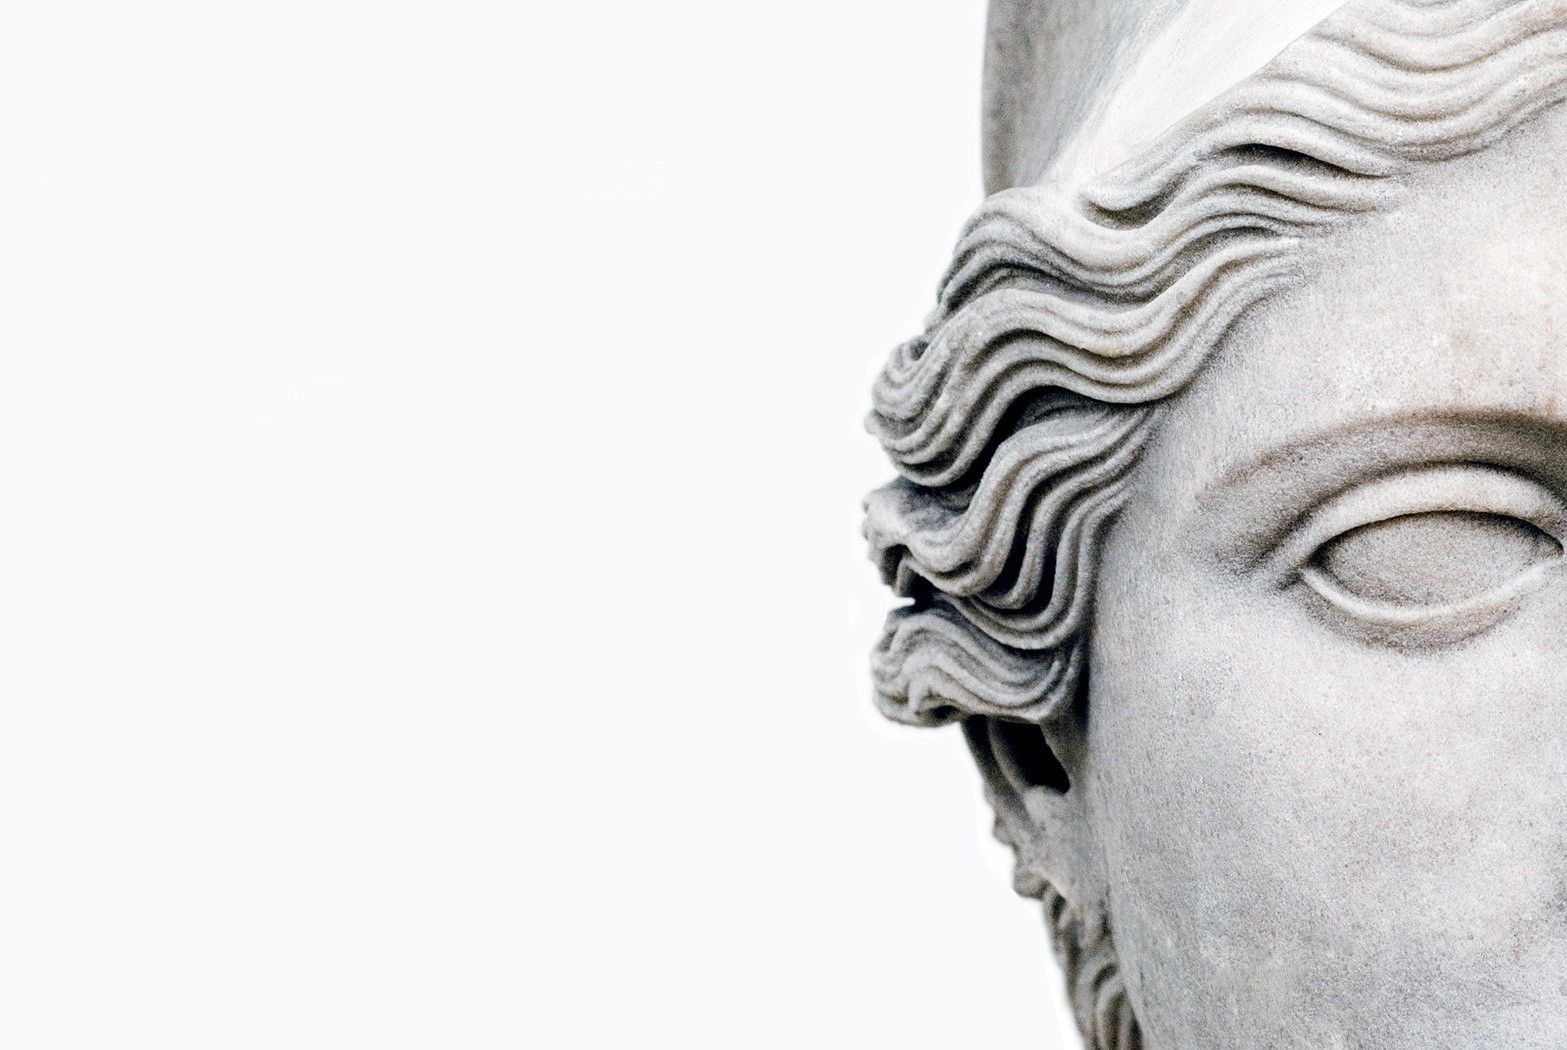 A close up of the face and hairline - Greek statue